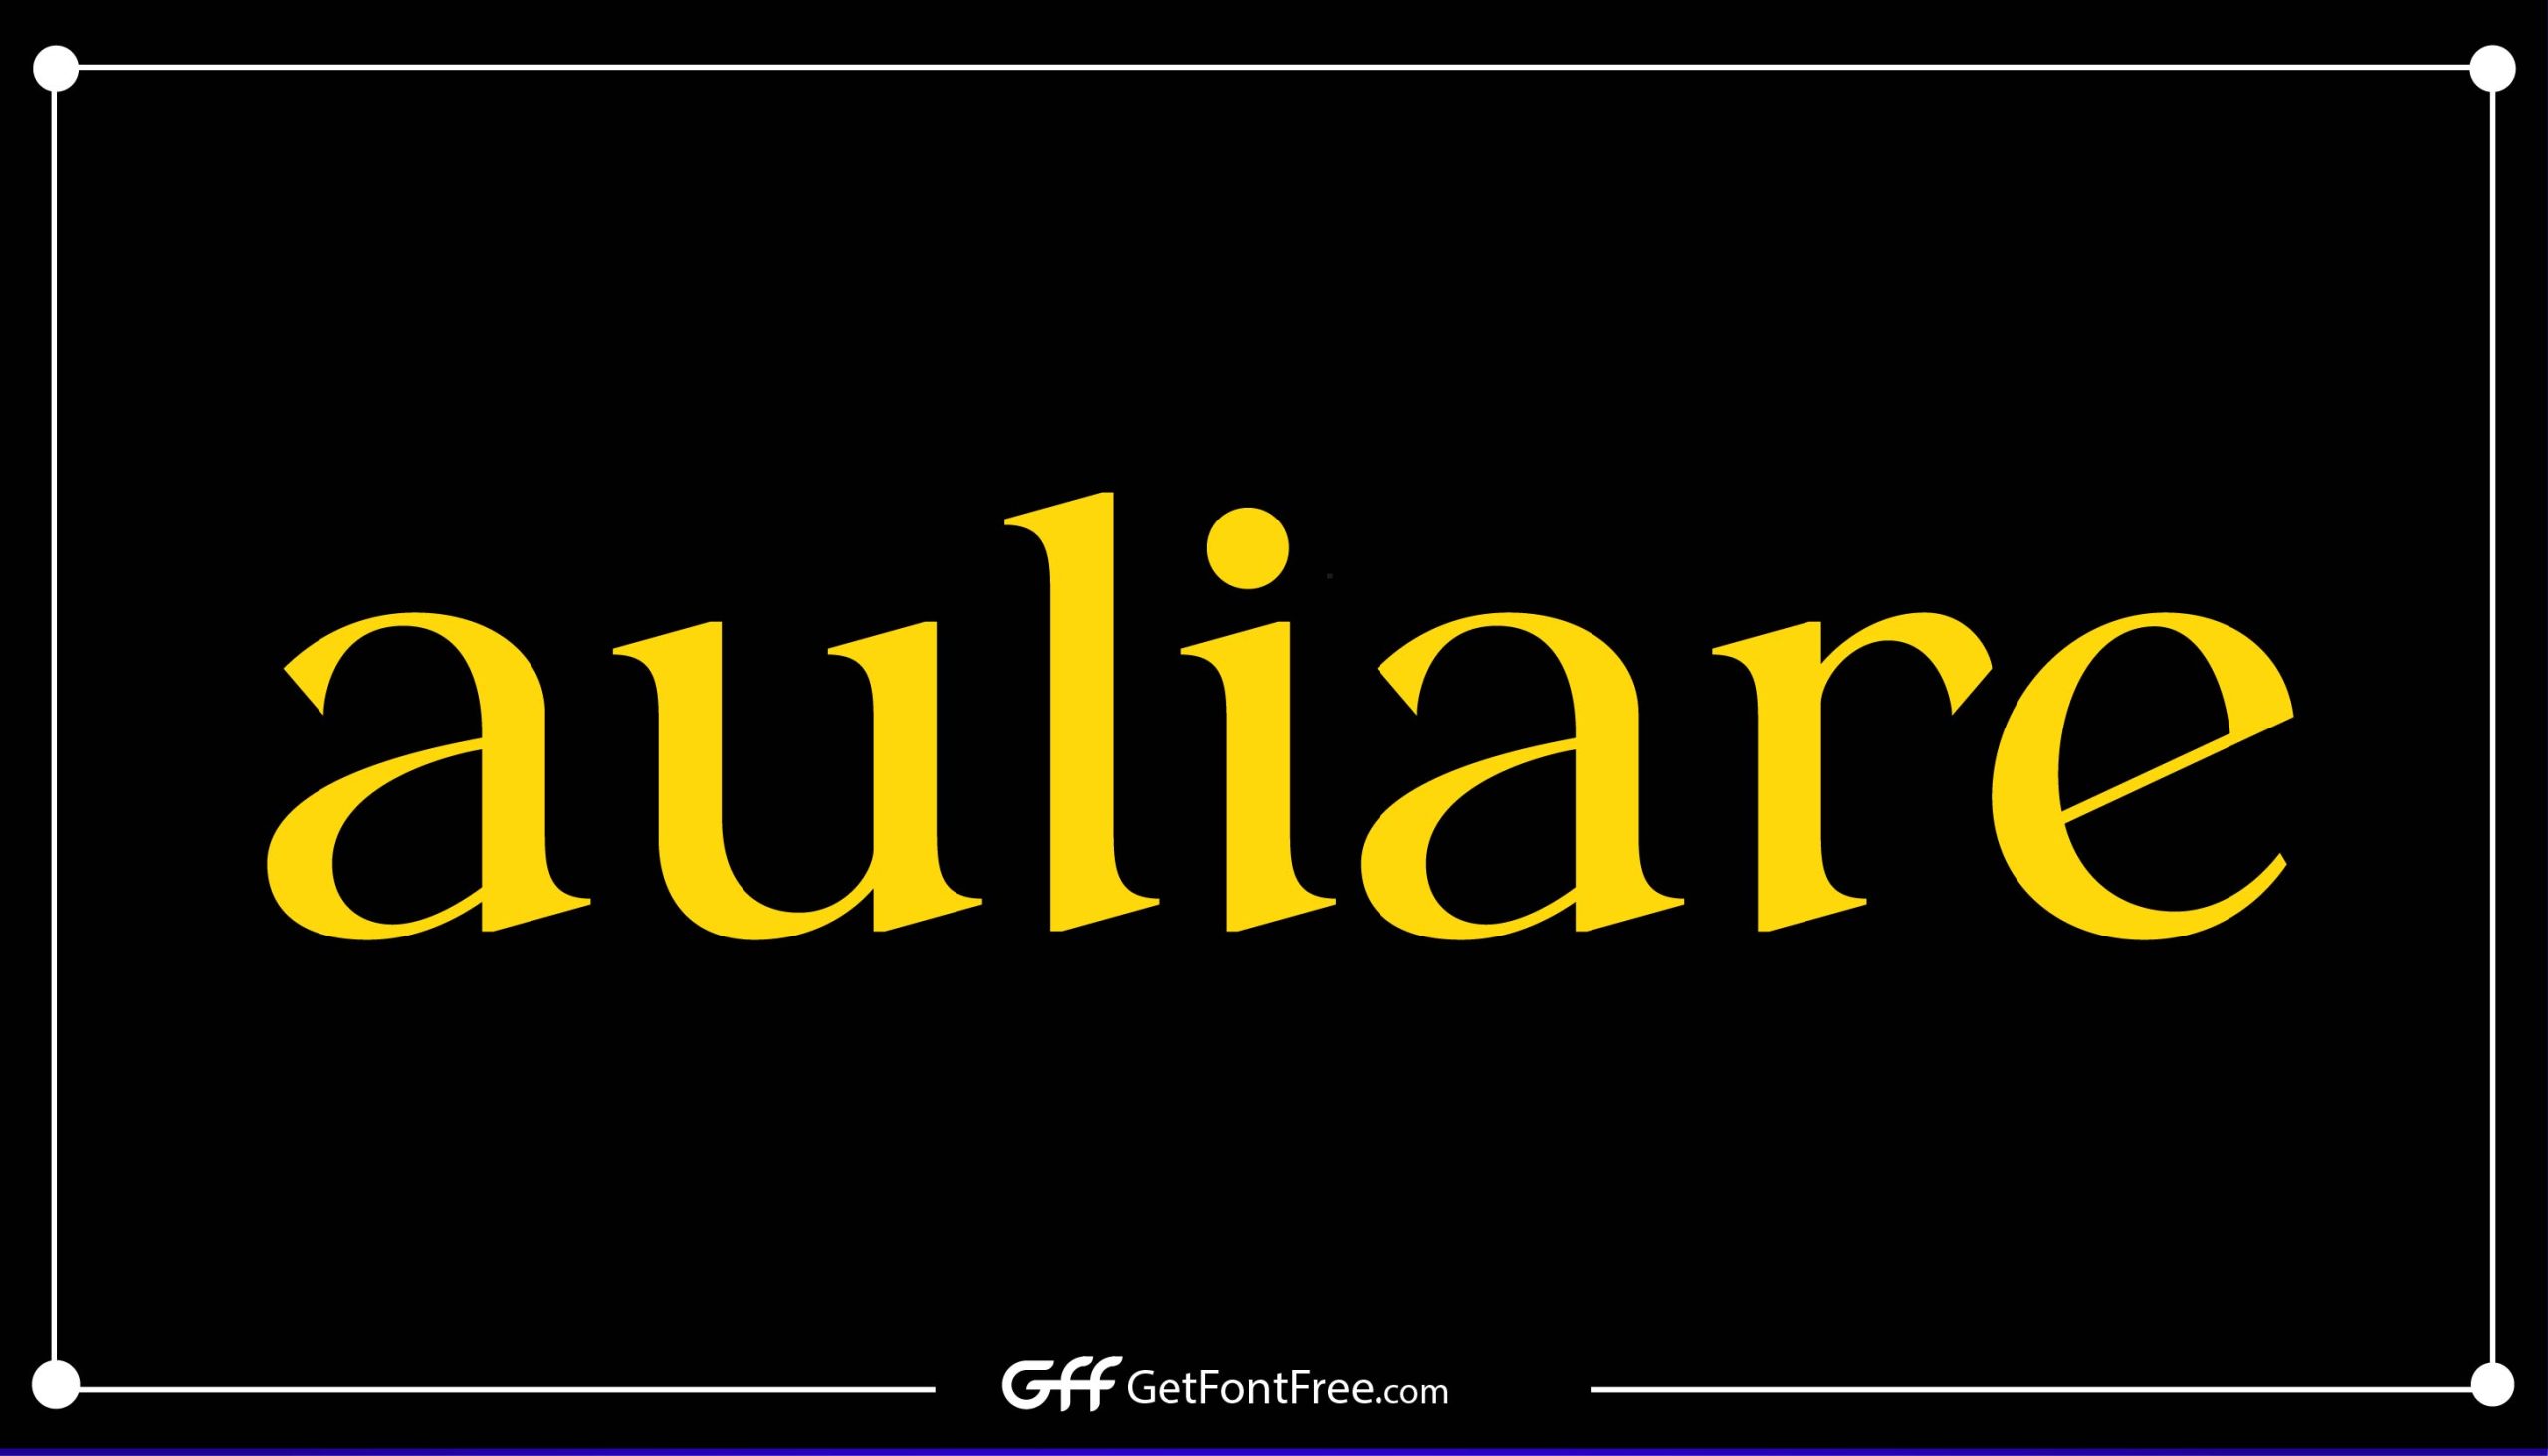 Auliare Font Free Download